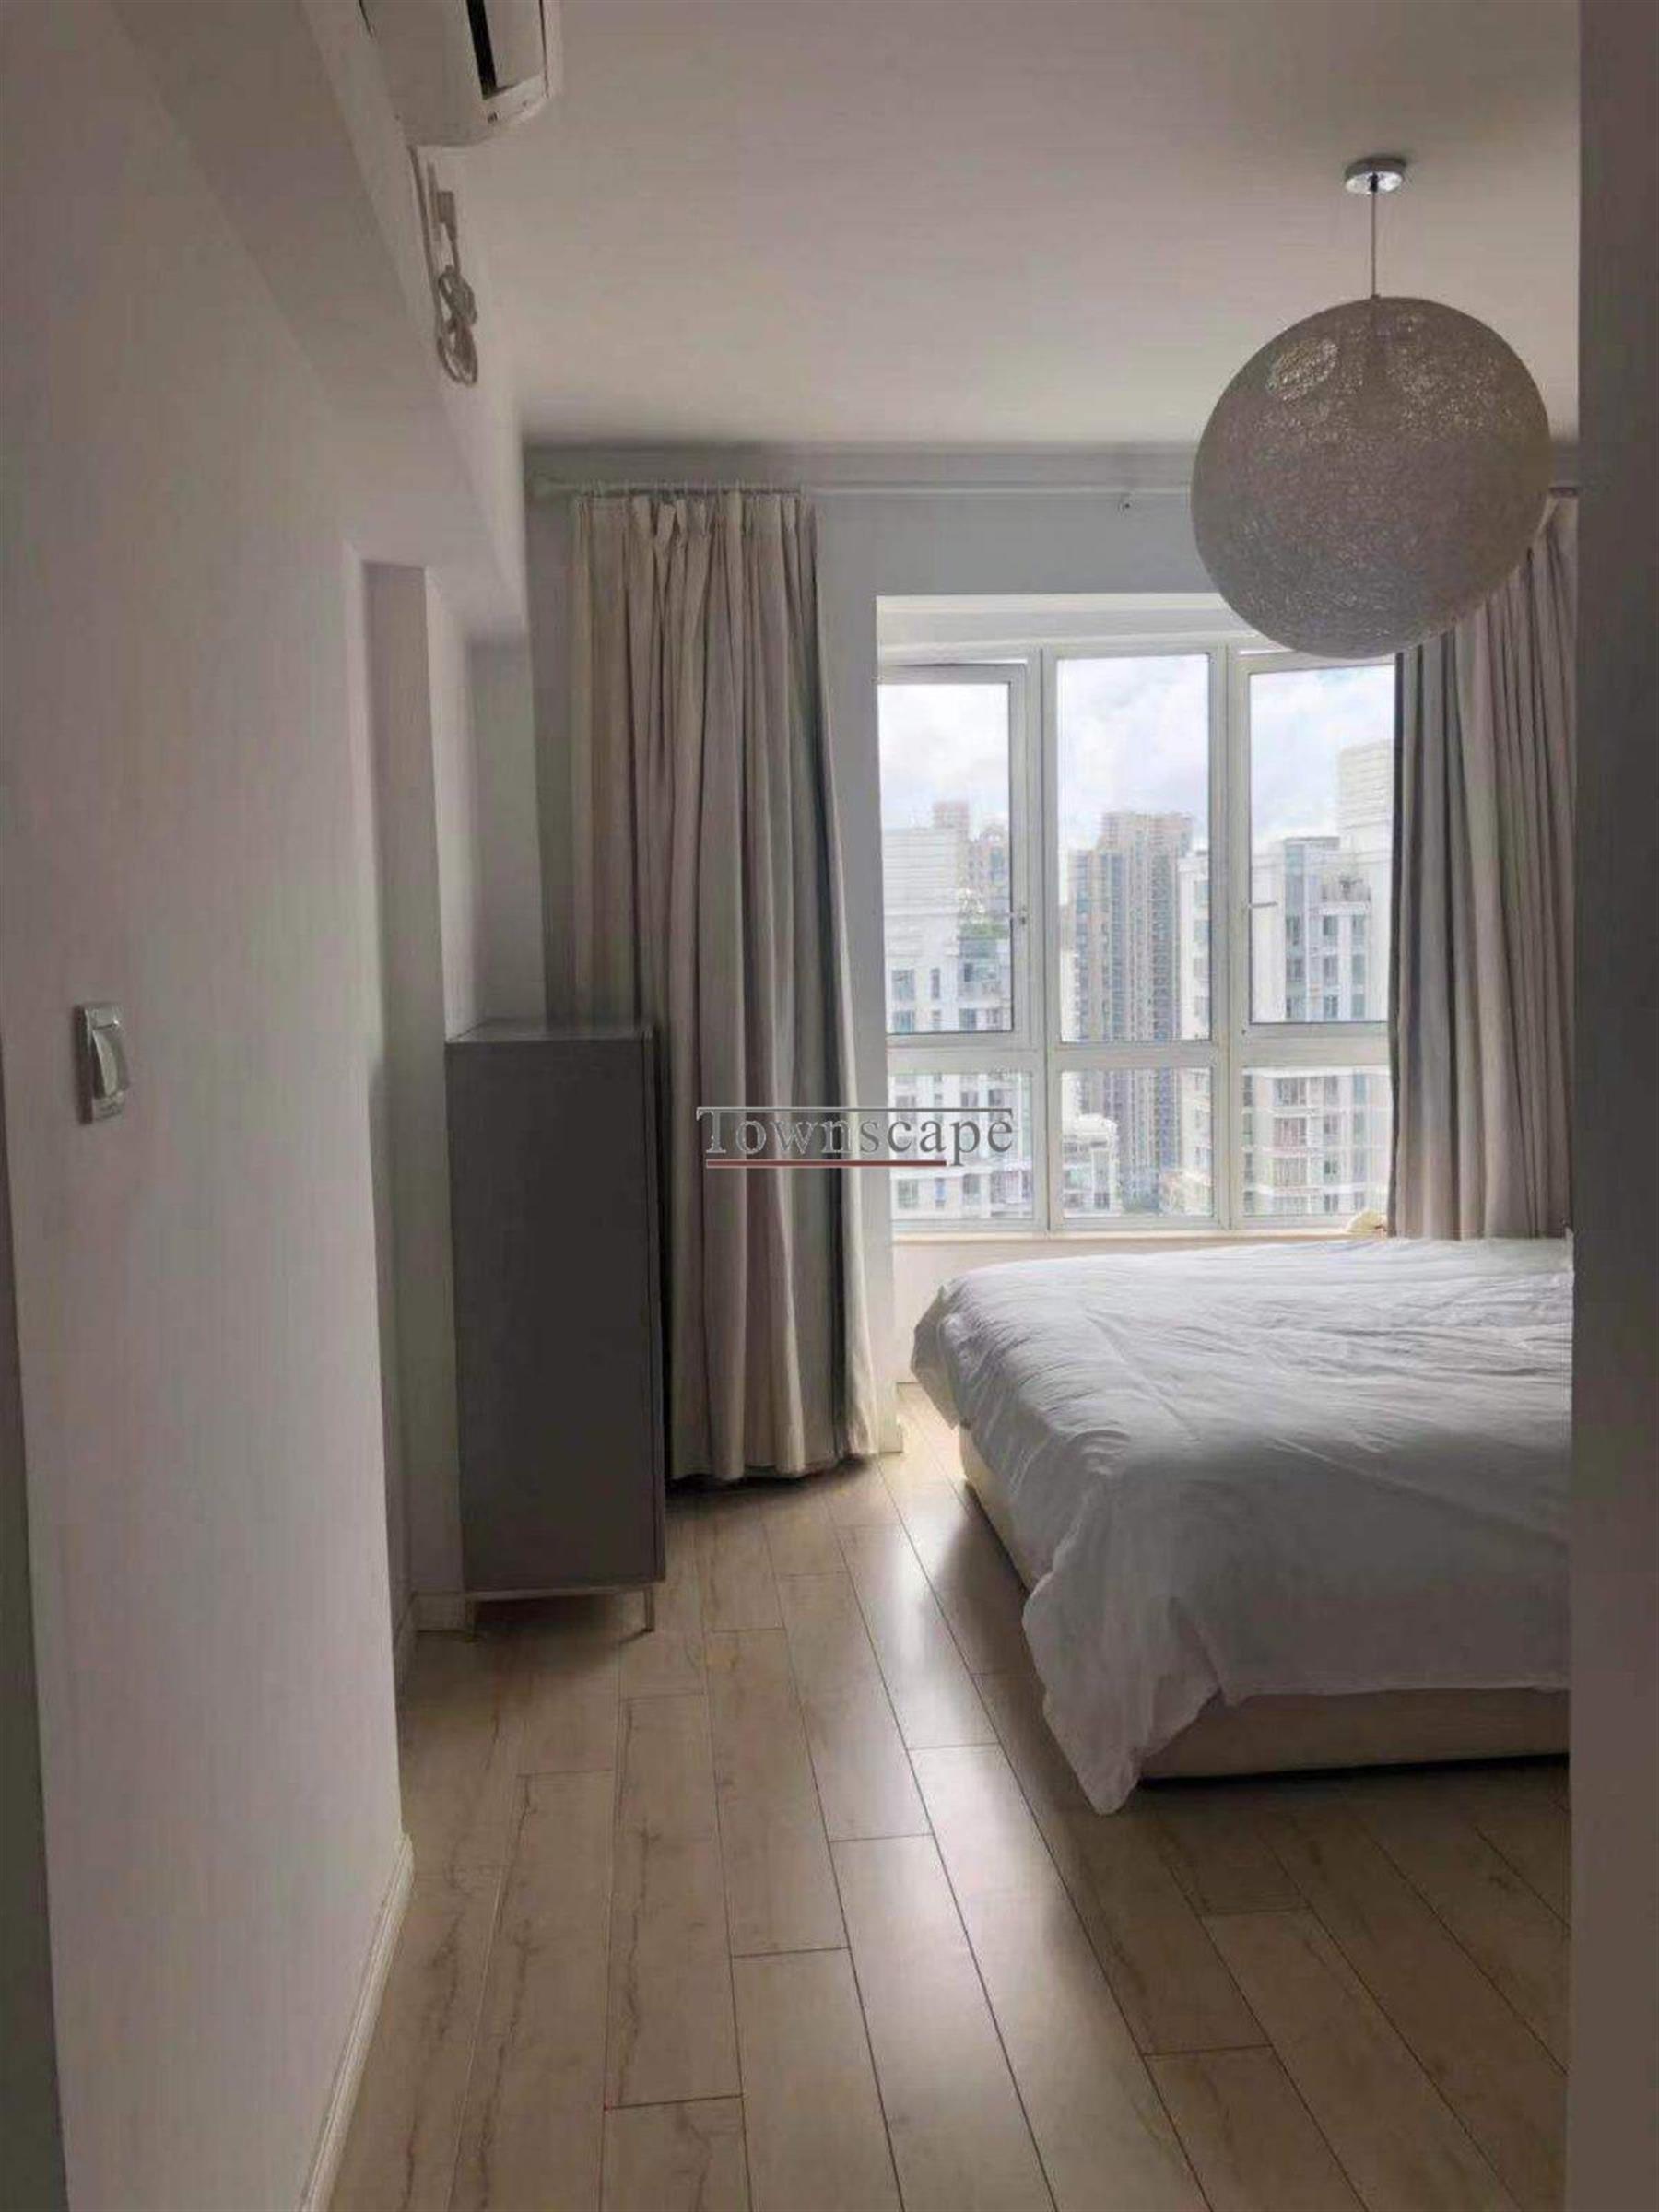 Bright Rooms Newly Renovated High Floor Apt w Great Views in Xujiahui La Cite or Rent